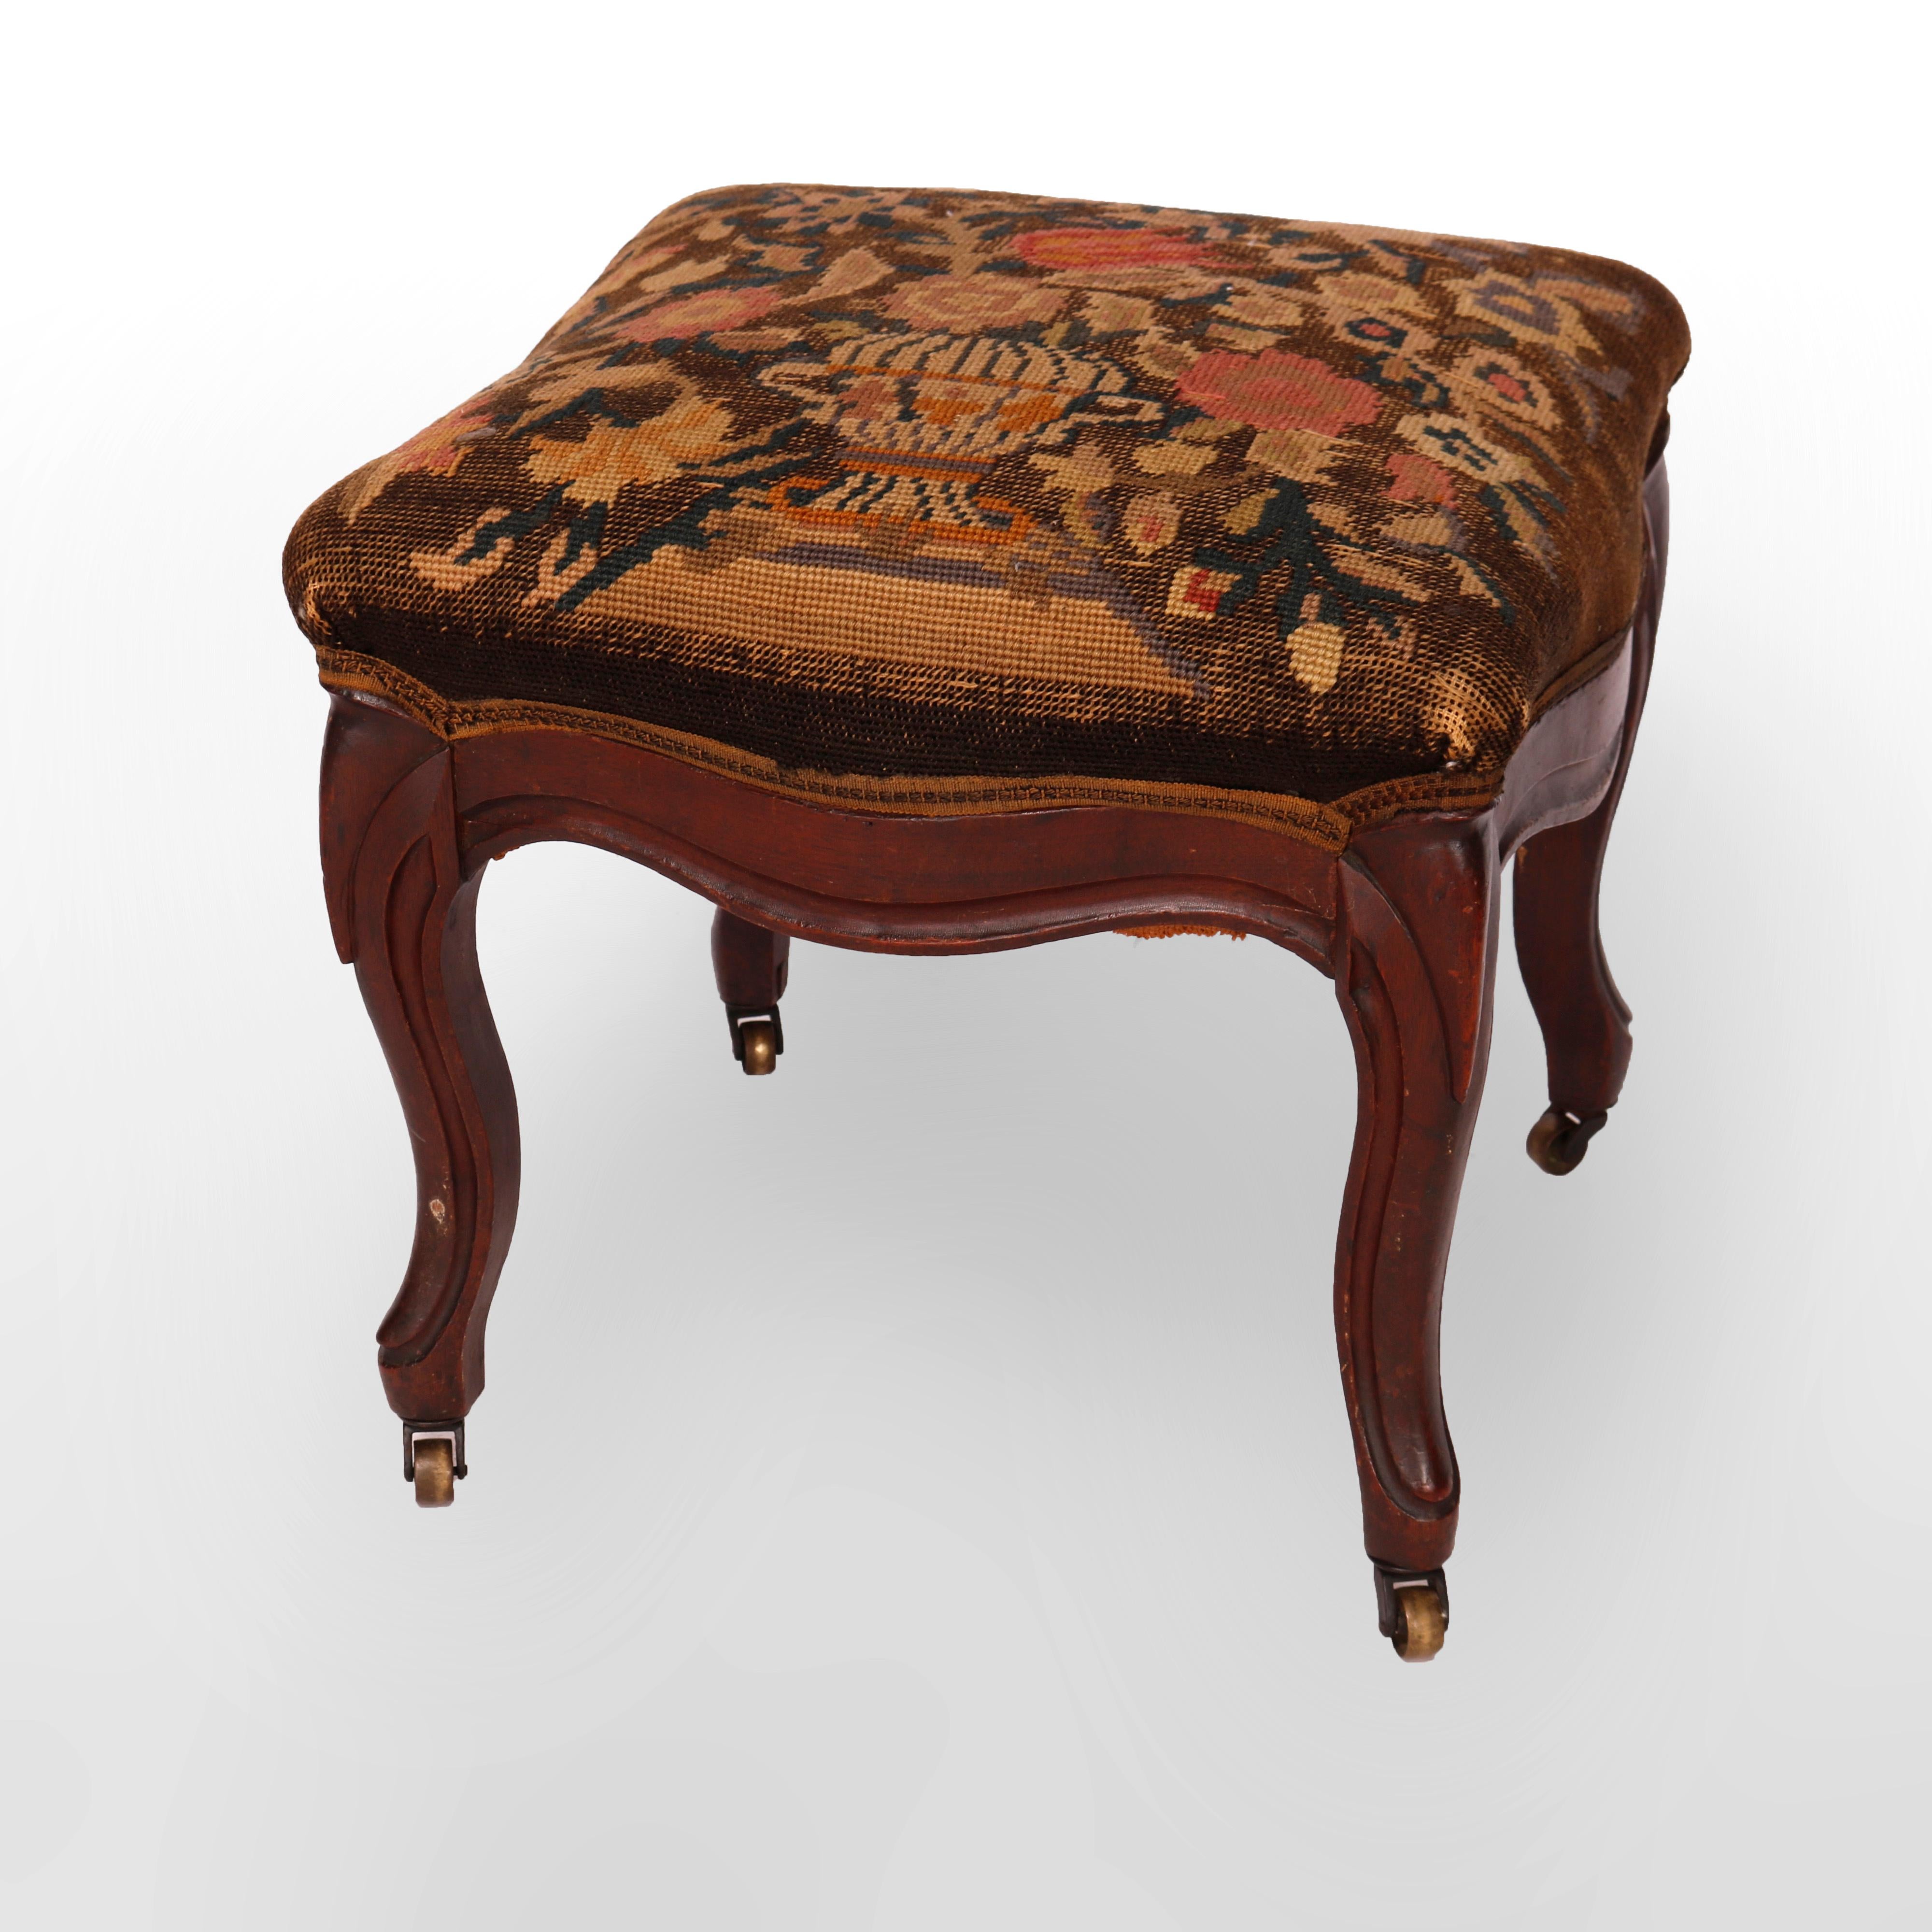 An antique footstool offers needlepoint seat with floral urn design over finger carved walnut base having cabriole legs, c1890

Measures - 15'' H X 15.5'' W X 15.5'' D.

Catalogue Note: Ask about DISCOUNTED DELIVERY RATES available to most regions